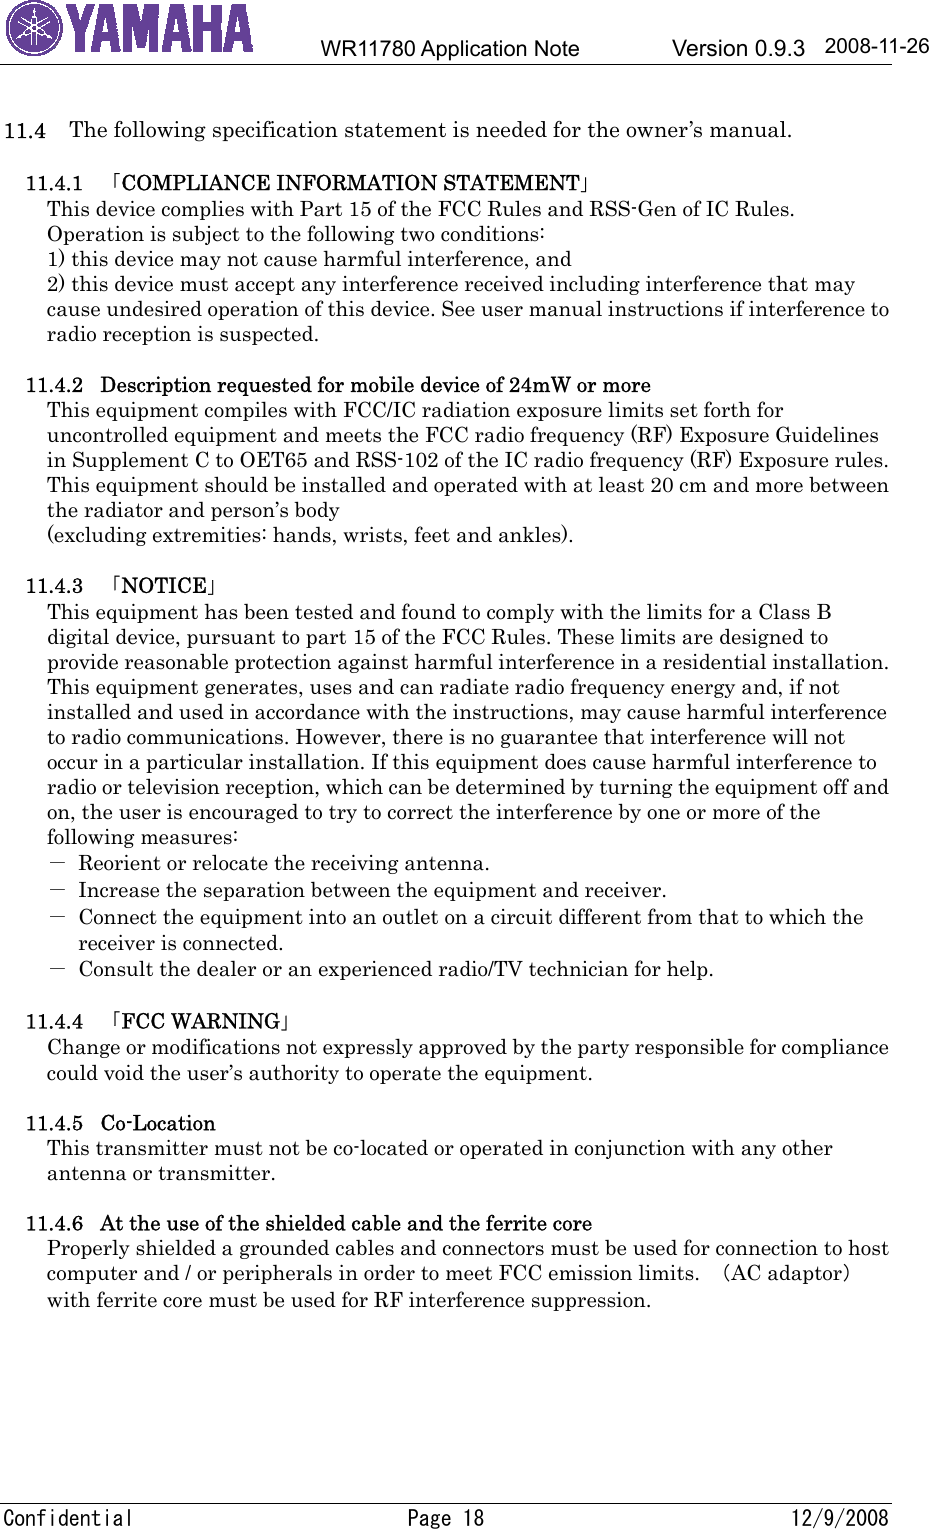        WR11780 Application Note        Version 0.9.3     Confidential  Page 18  12/9/2008 2008-11-26 11.4     The following specification statement is needed for the owner’s manual.  11.4.1  「COMPLIANCE INFORMATION STATEMENT」 This device complies with Part 15 of the FCC Rules and RSS-Gen of IC Rules. Operation is subject to the following two conditions: 1) this device may not cause harmful interference, and 2) this device must accept any interference received including interference that may cause undesired operation of this device. See user manual instructions if interference to radio reception is suspected.  11.4.2  Description requested for mobile device of 24mW or more This equipment compiles with FCC/IC radiation exposure limits set forth for uncontrolled equipment and meets the FCC radio frequency (RF) Exposure Guidelines in Supplement C to OET65 and RSS-102 of the IC radio frequency (RF) Exposure rules. This equipment should be installed and operated with at least 20 cm and more between the radiator and person’s body   (excluding extremities: hands, wrists, feet and ankles).  11.4.3  「NOTICE」 This equipment has been tested and found to comply with the limits for a Class B digital device, pursuant to part 15 of the FCC Rules. These limits are designed to provide reasonable protection against harmful interference in a residential installation. This equipment generates, uses and can radiate radio frequency energy and, if not installed and used in accordance with the instructions, may cause harmful interference to radio communications. However, there is no guarantee that interference will not occur in a particular installation. If this equipment does cause harmful interference to radio or television reception, which can be determined by turning the equipment off and on, the user is encouraged to try to correct the interference by one or more of the following measures: －  Reorient or relocate the receiving antenna. －  Increase the separation between the equipment and receiver. －  Connect the equipment into an outlet on a circuit different from that to which the   receiver is connected. －  Consult the dealer or an experienced radio/TV technician for help.  11.4.4  「FCC WARNING」 Change or modifications not expressly approved by the party responsible for compliance could void the user’s authority to operate the equipment.  11.4.5 Co-Location This transmitter must not be co-located or operated in conjunction with any other antenna or transmitter.  11.4.6  At the use of the shielded cable and the ferrite core Properly shielded a grounded cables and connectors must be used for connection to host computer and / or peripherals in order to meet FCC emission limits.  （AC adaptor） with ferrite core must be used for RF interference suppression. 